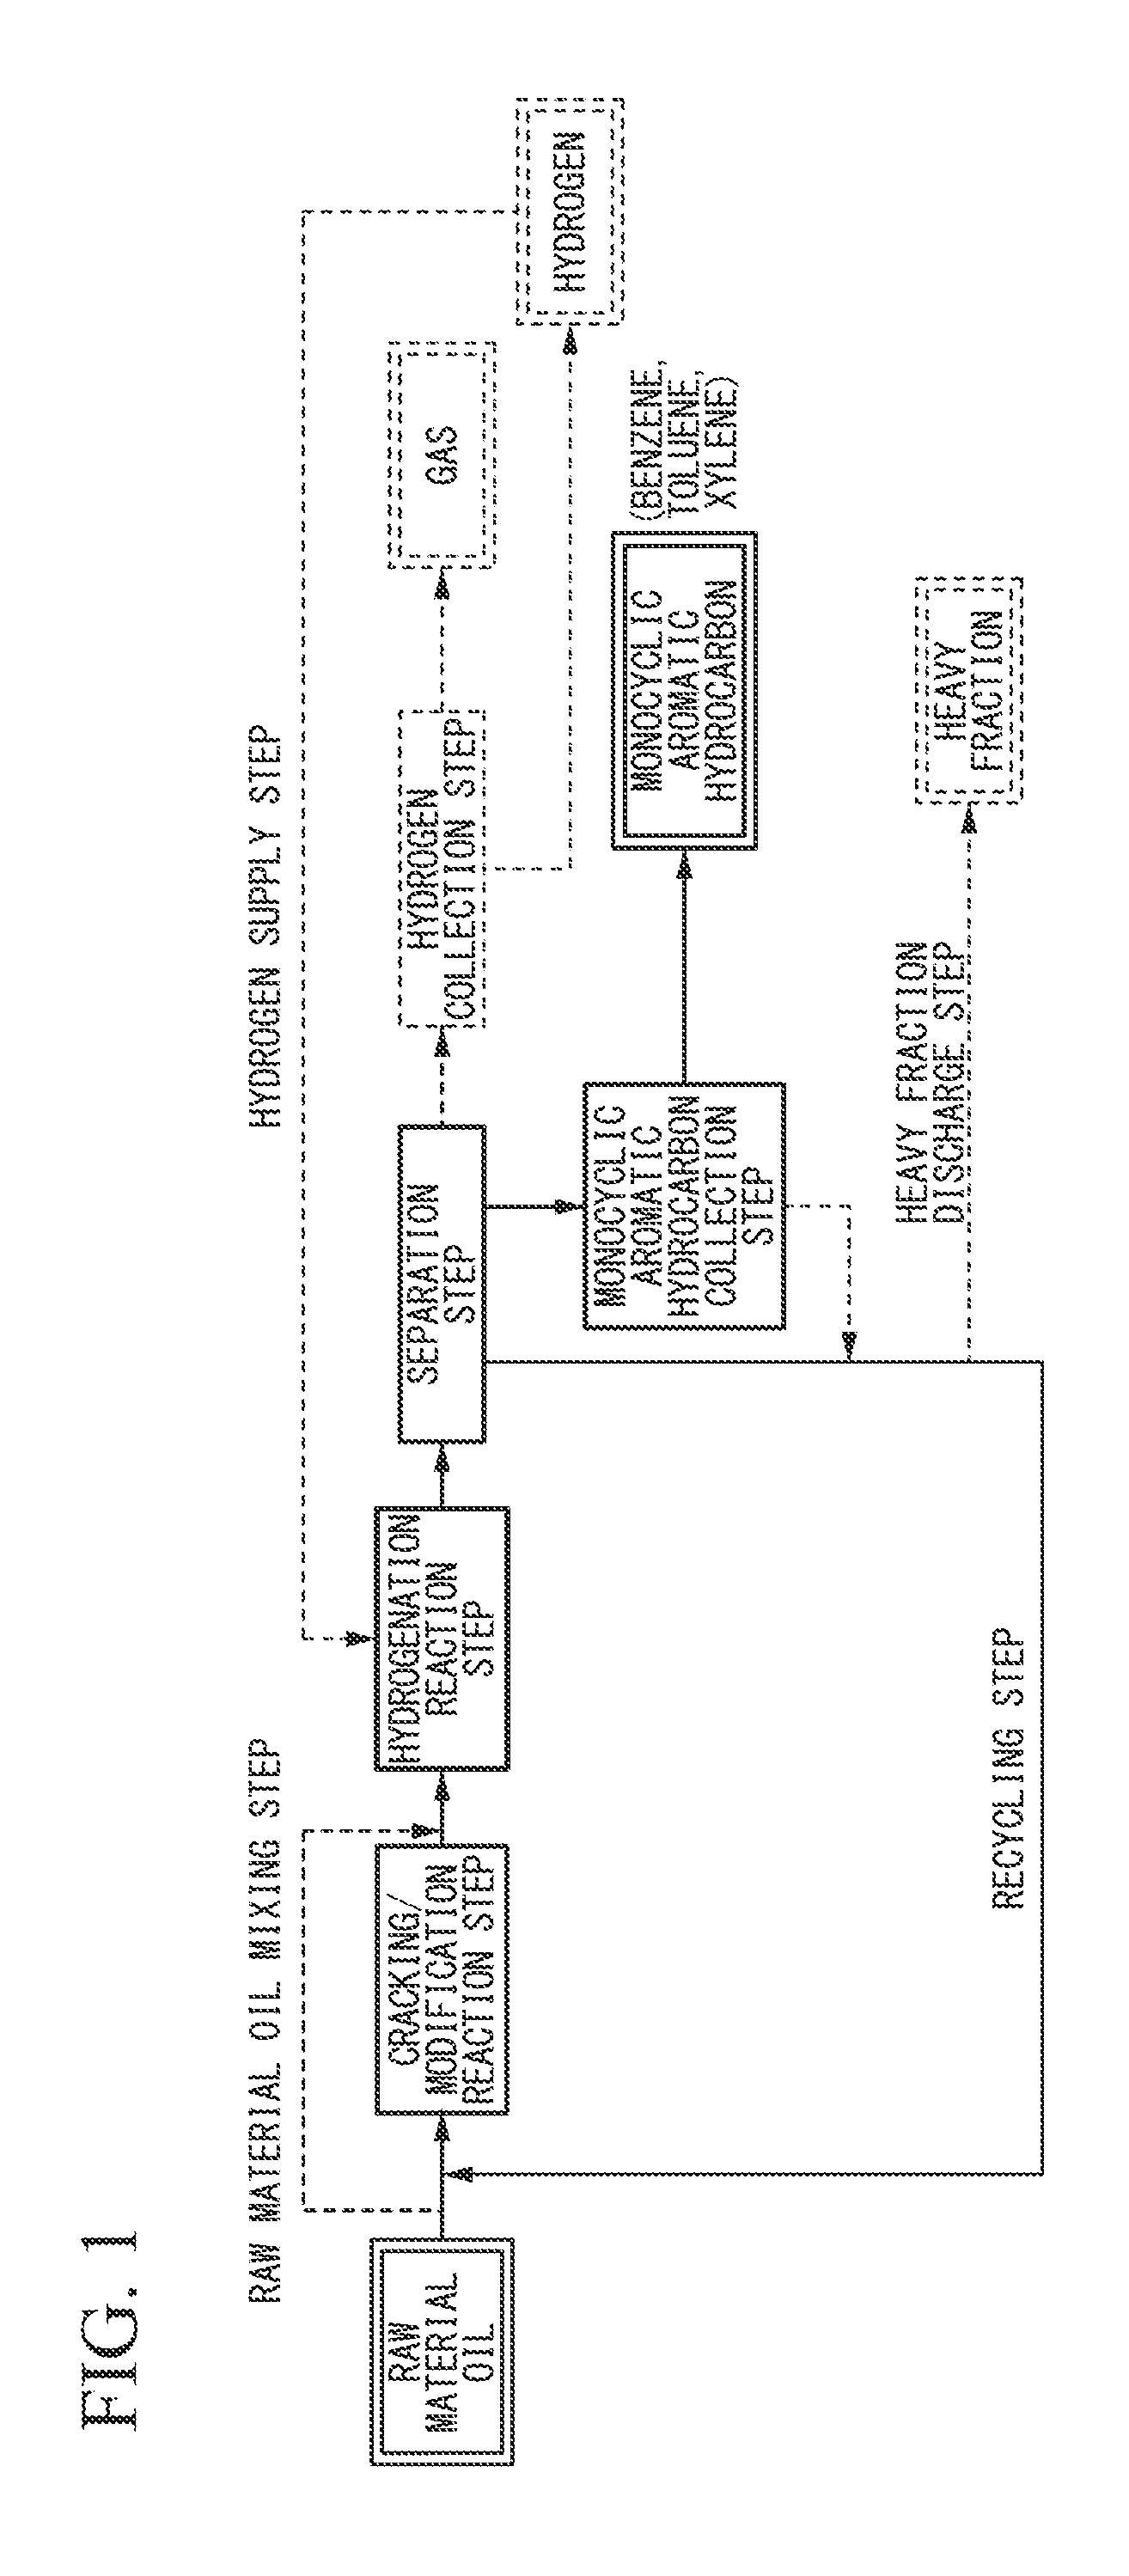 Method for producing monocyclic aromatic hydrocarbons